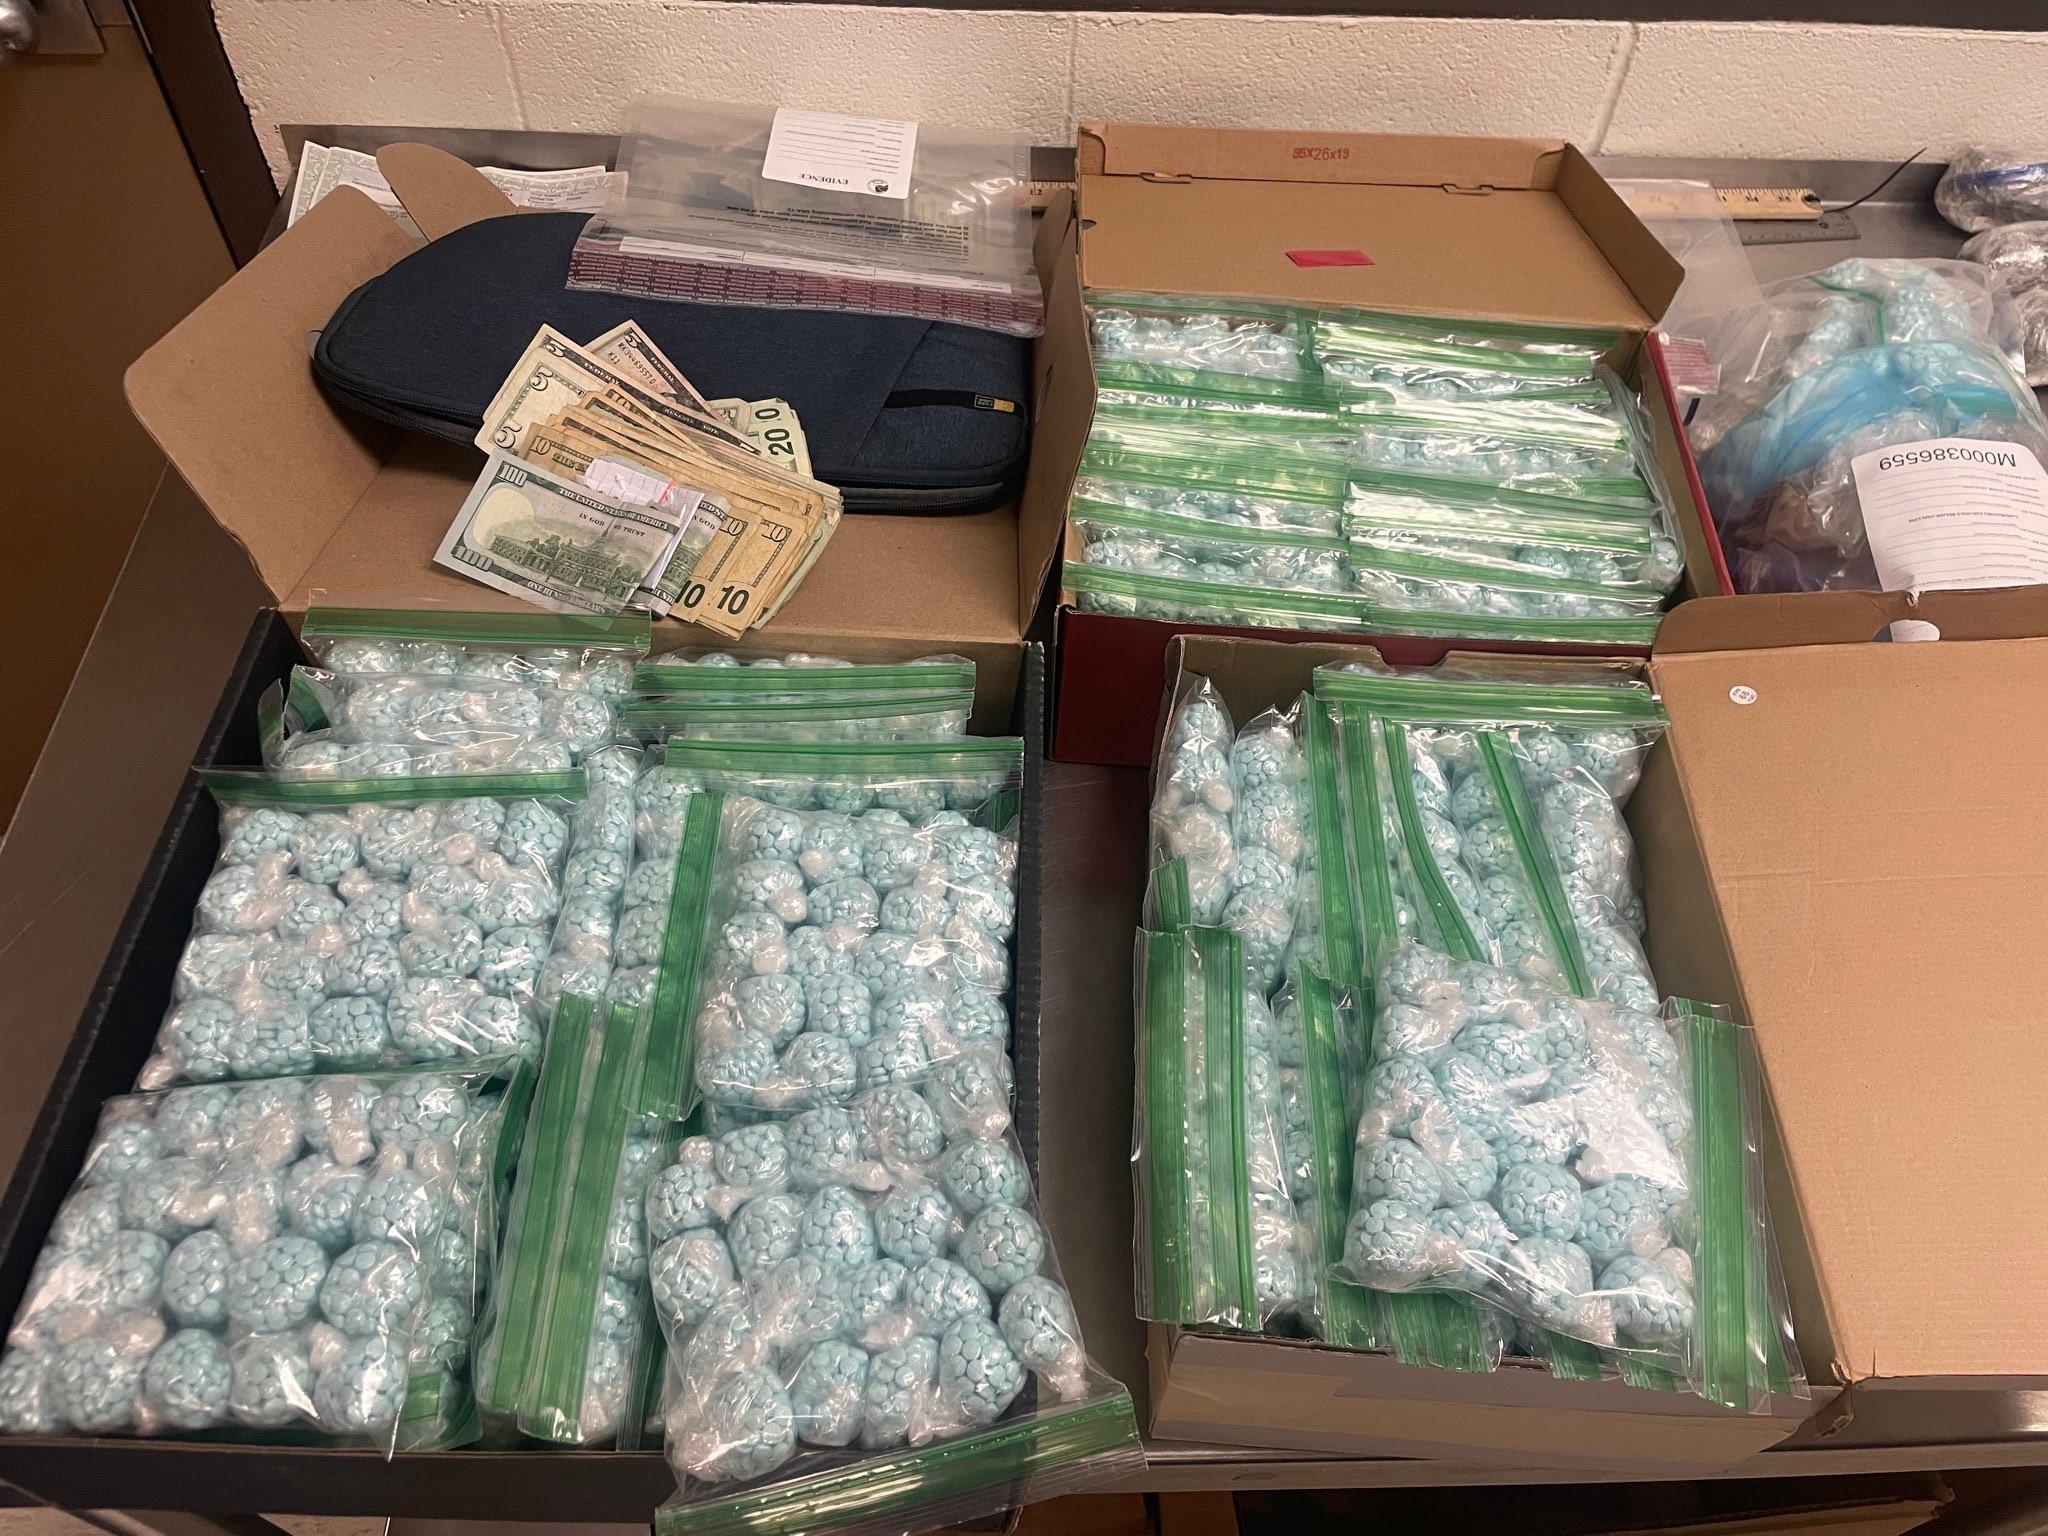 Colorado law enforcement seized about 170,000 fentanyl pills in a bust on June 6. Officials say that amount of the powerful opioid has the potential to kill millions of people.